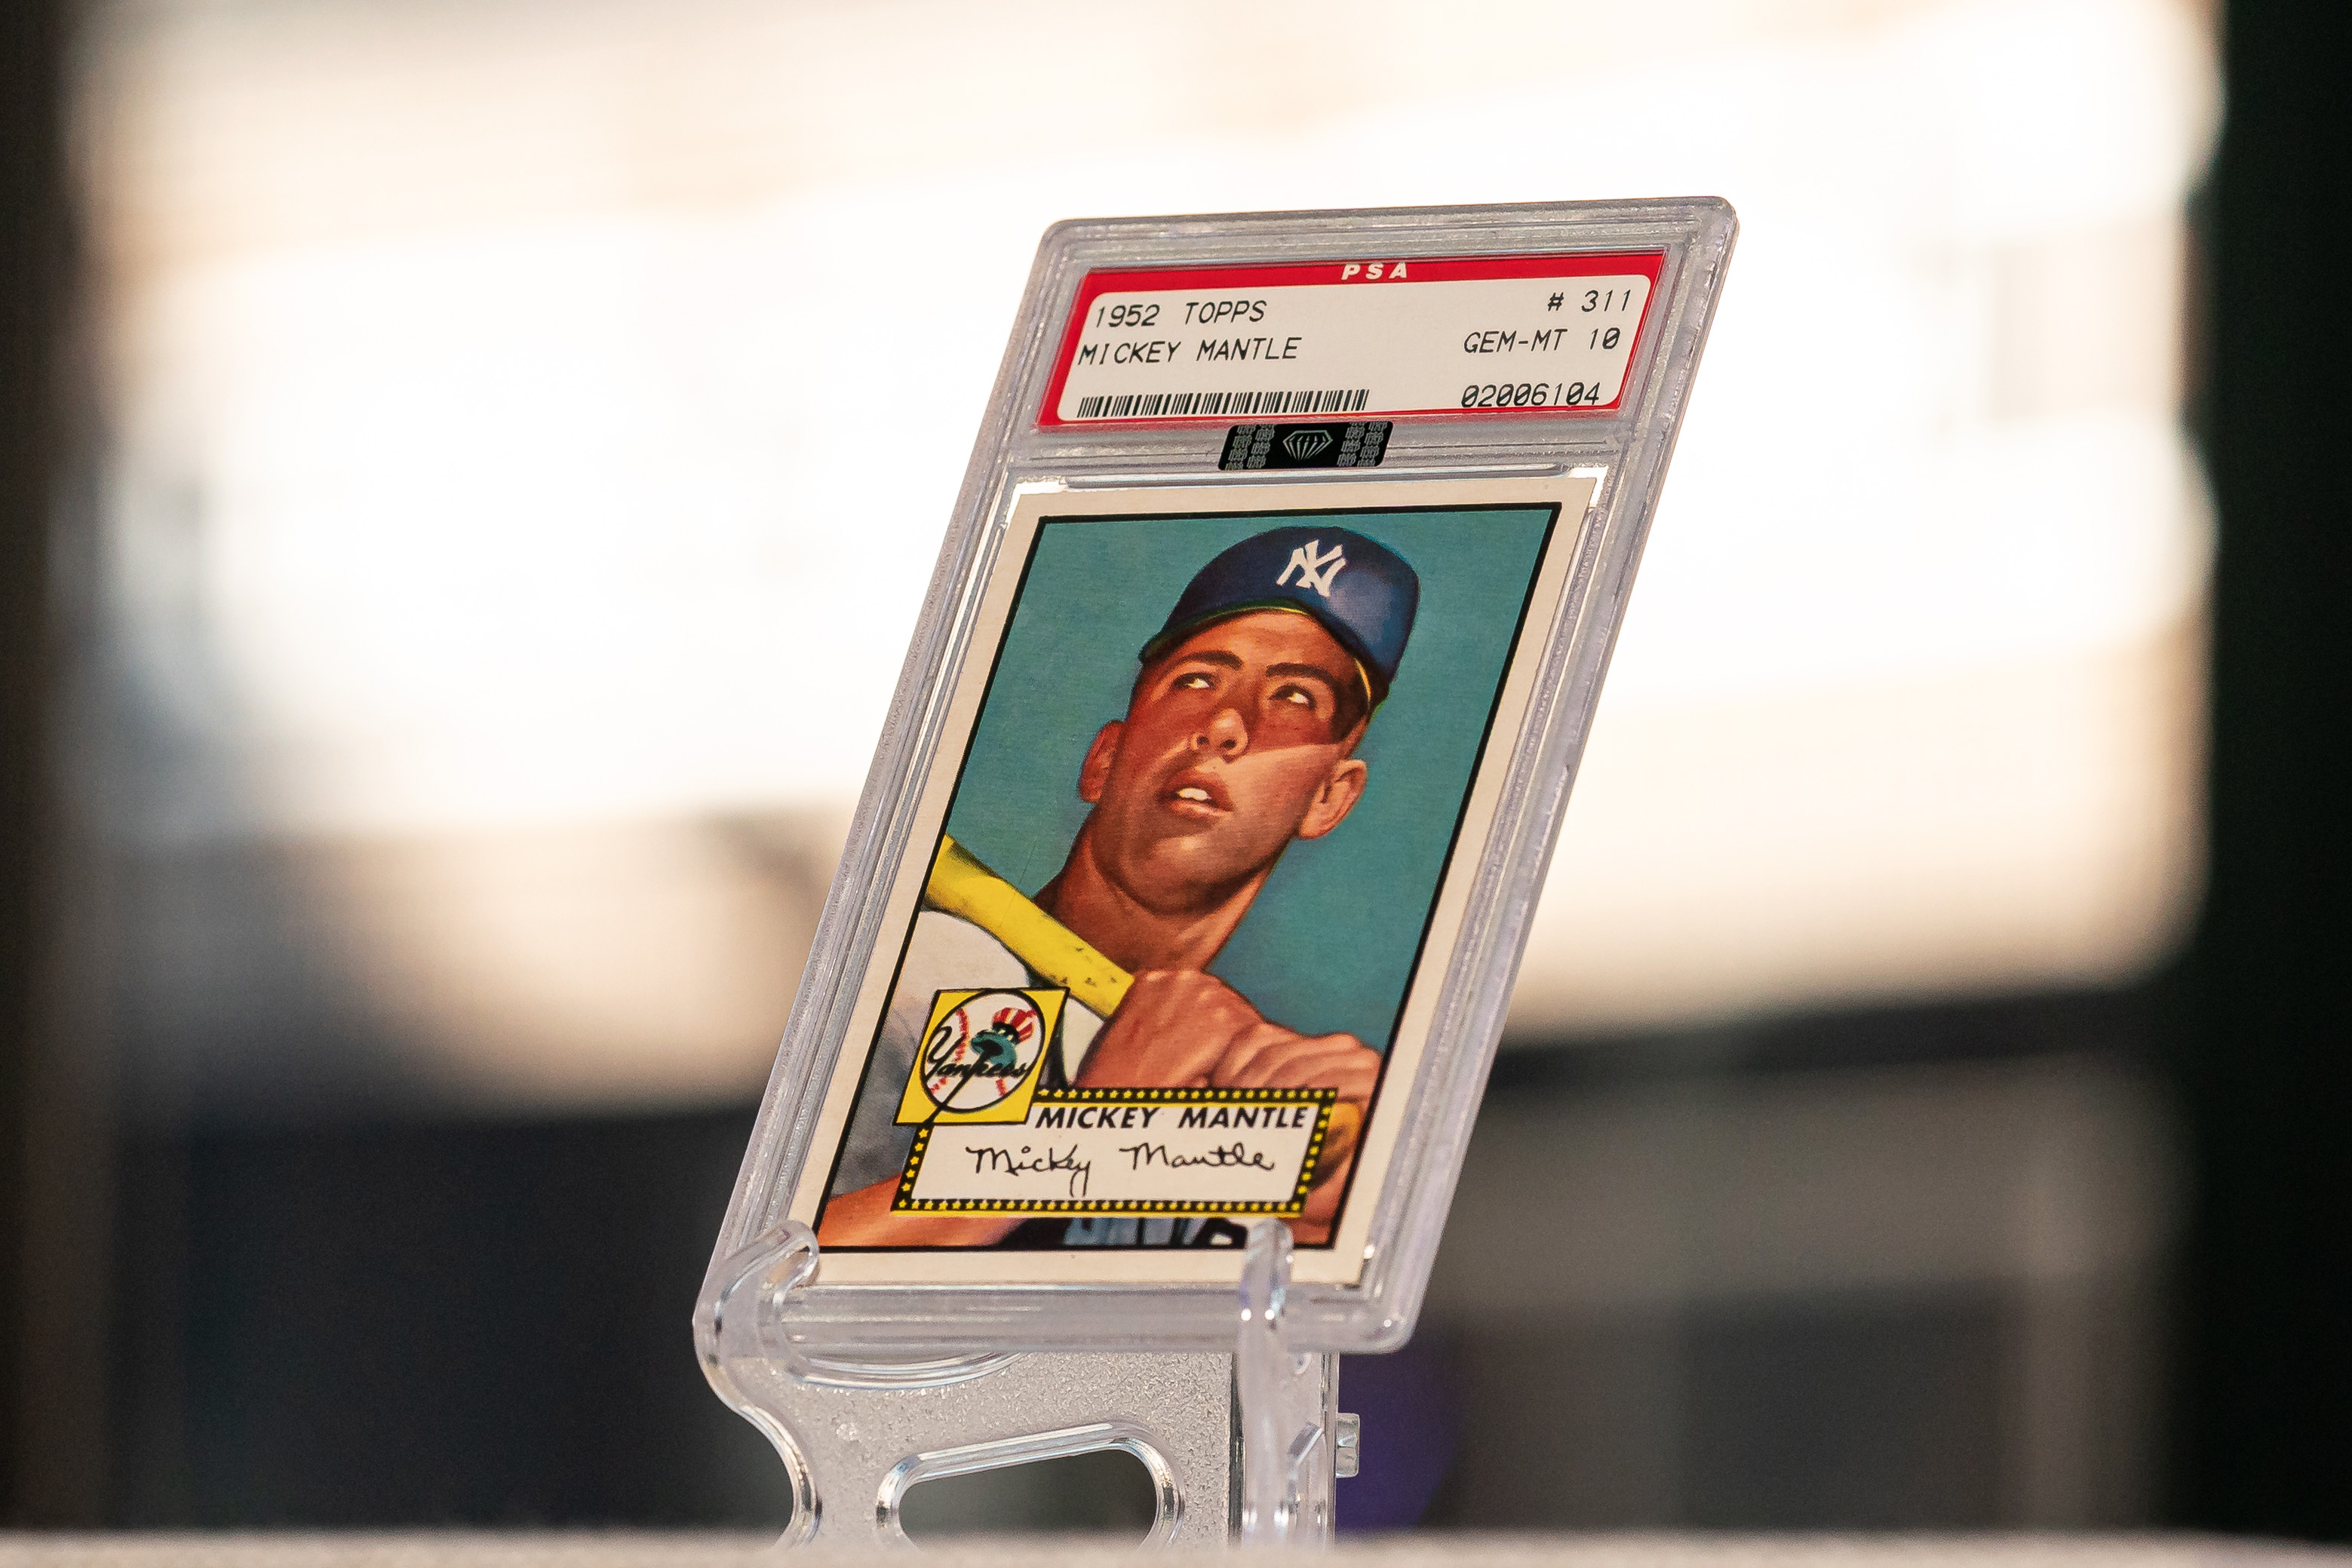 Big bucks: You won't believe how much this Mickey Mantle baseball card sold  for 